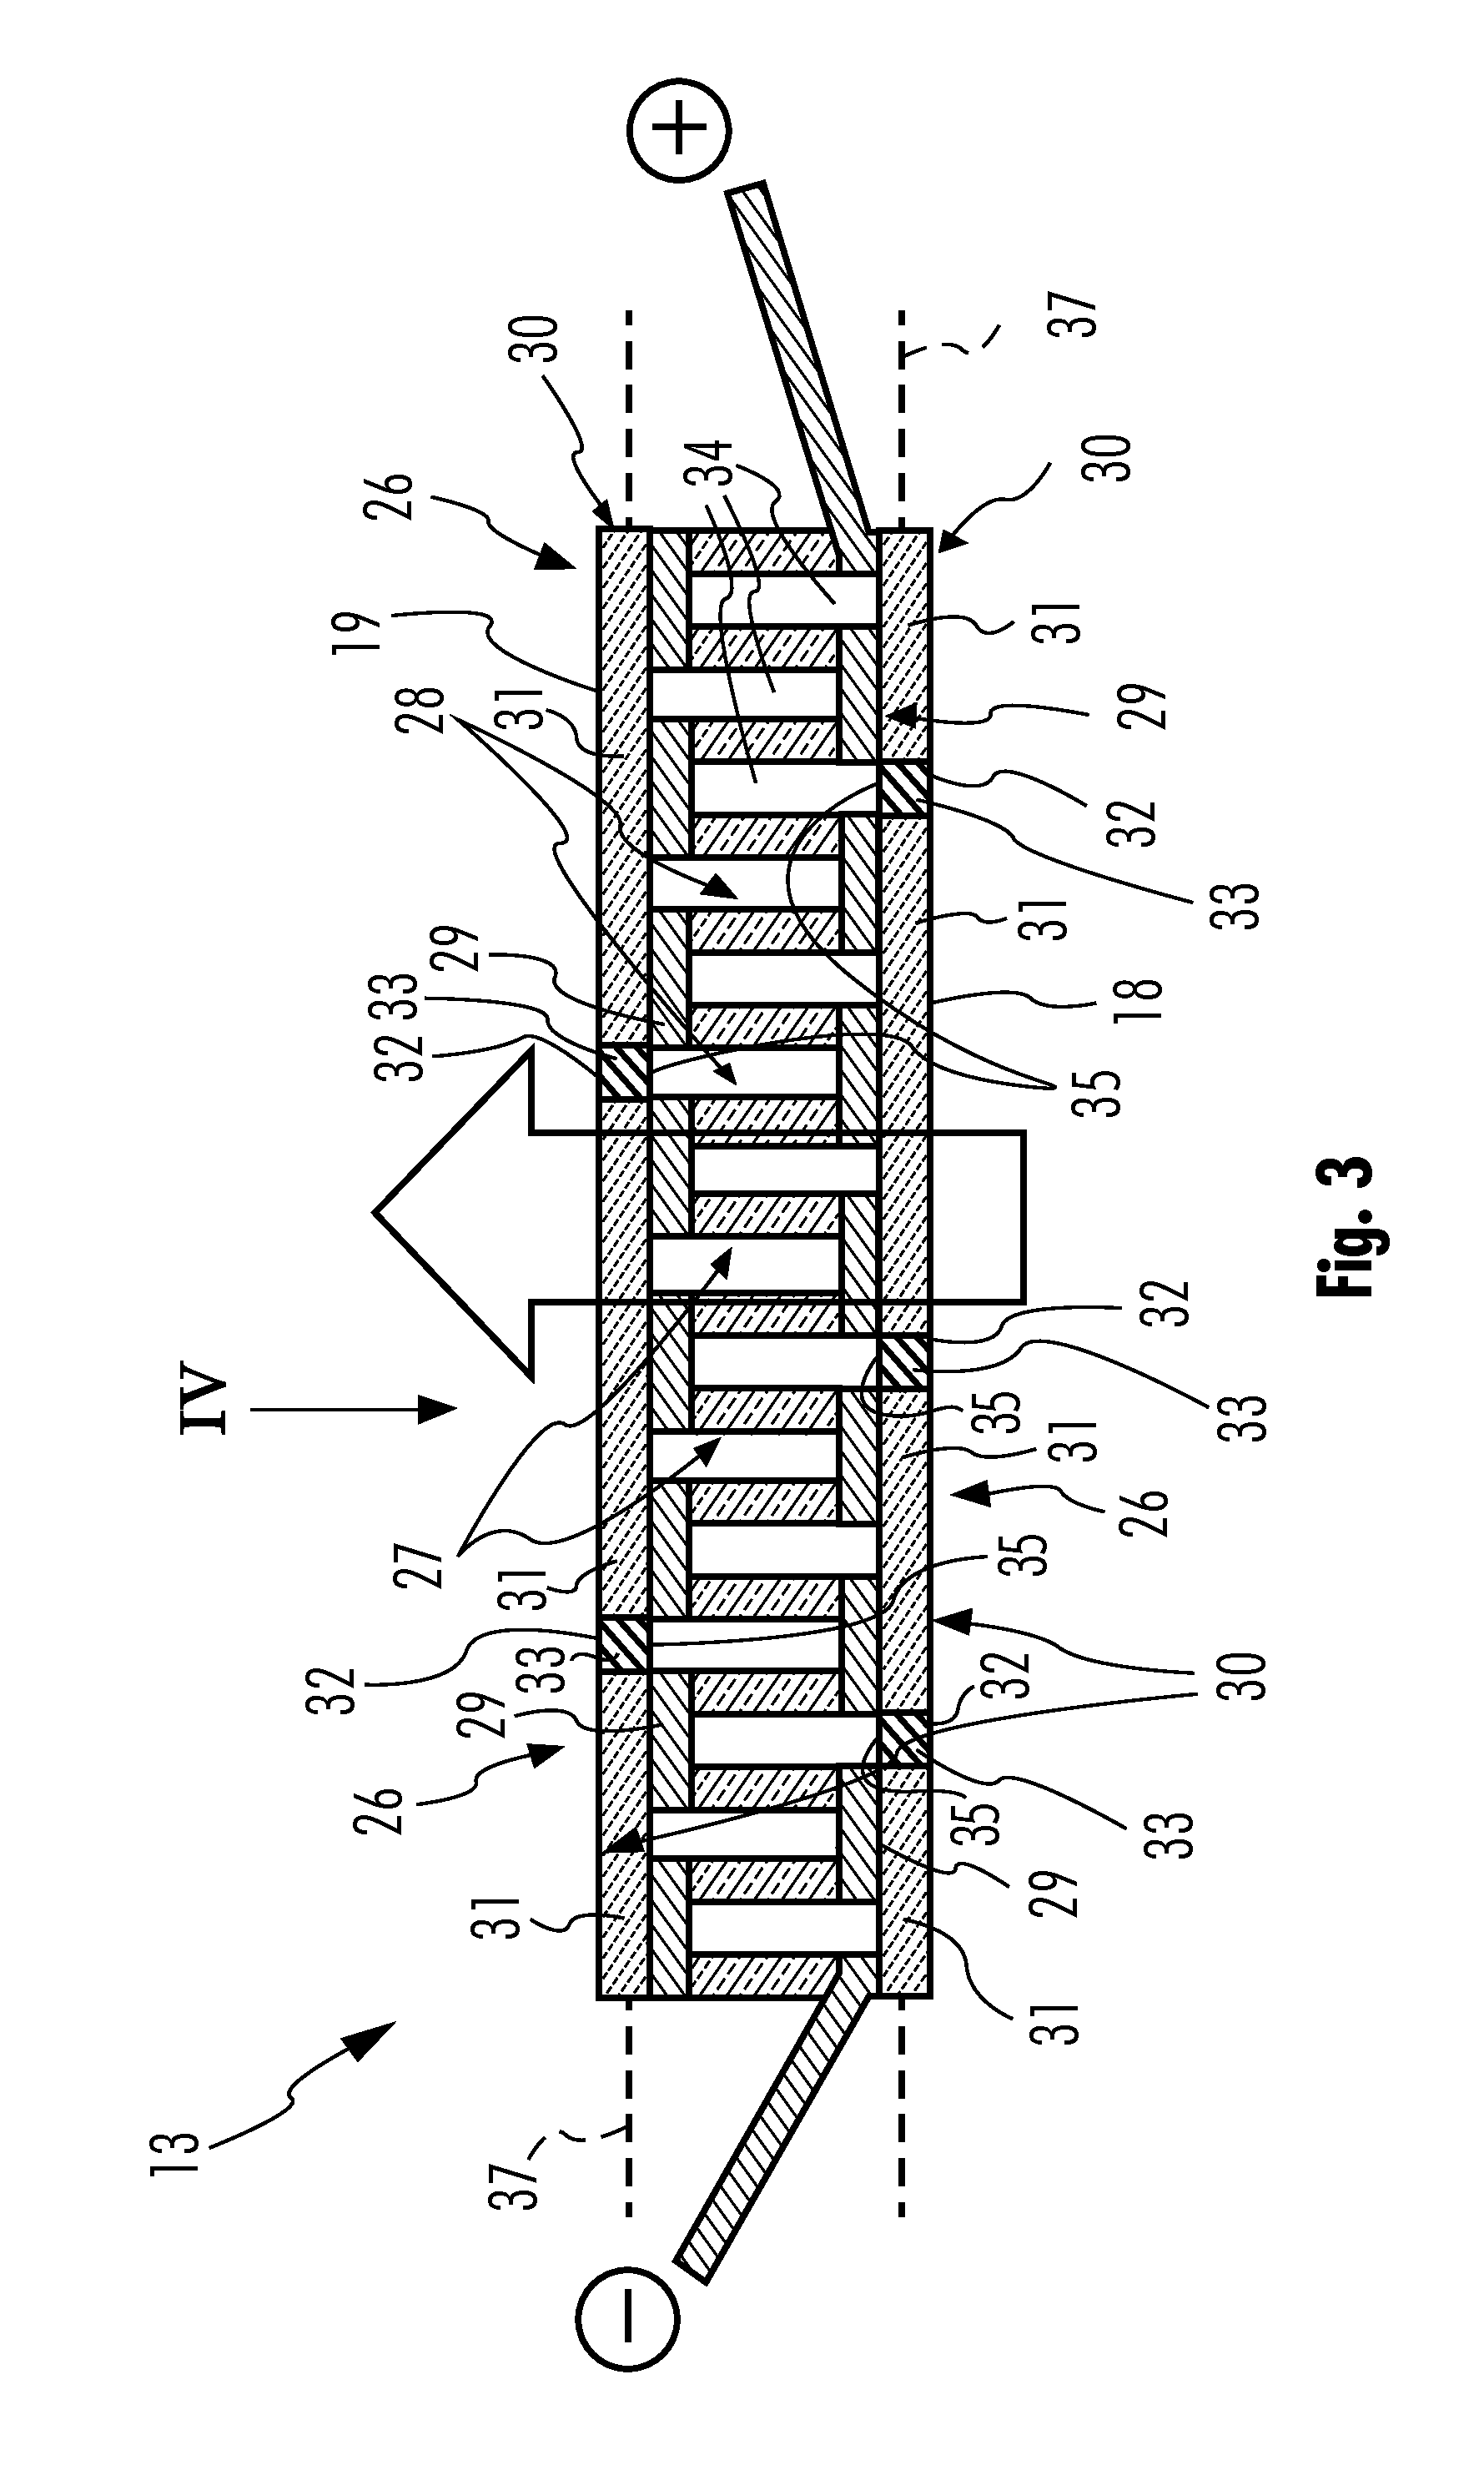 Thermoelectric module, heat exchanger, exhaust system and internal combustion engine